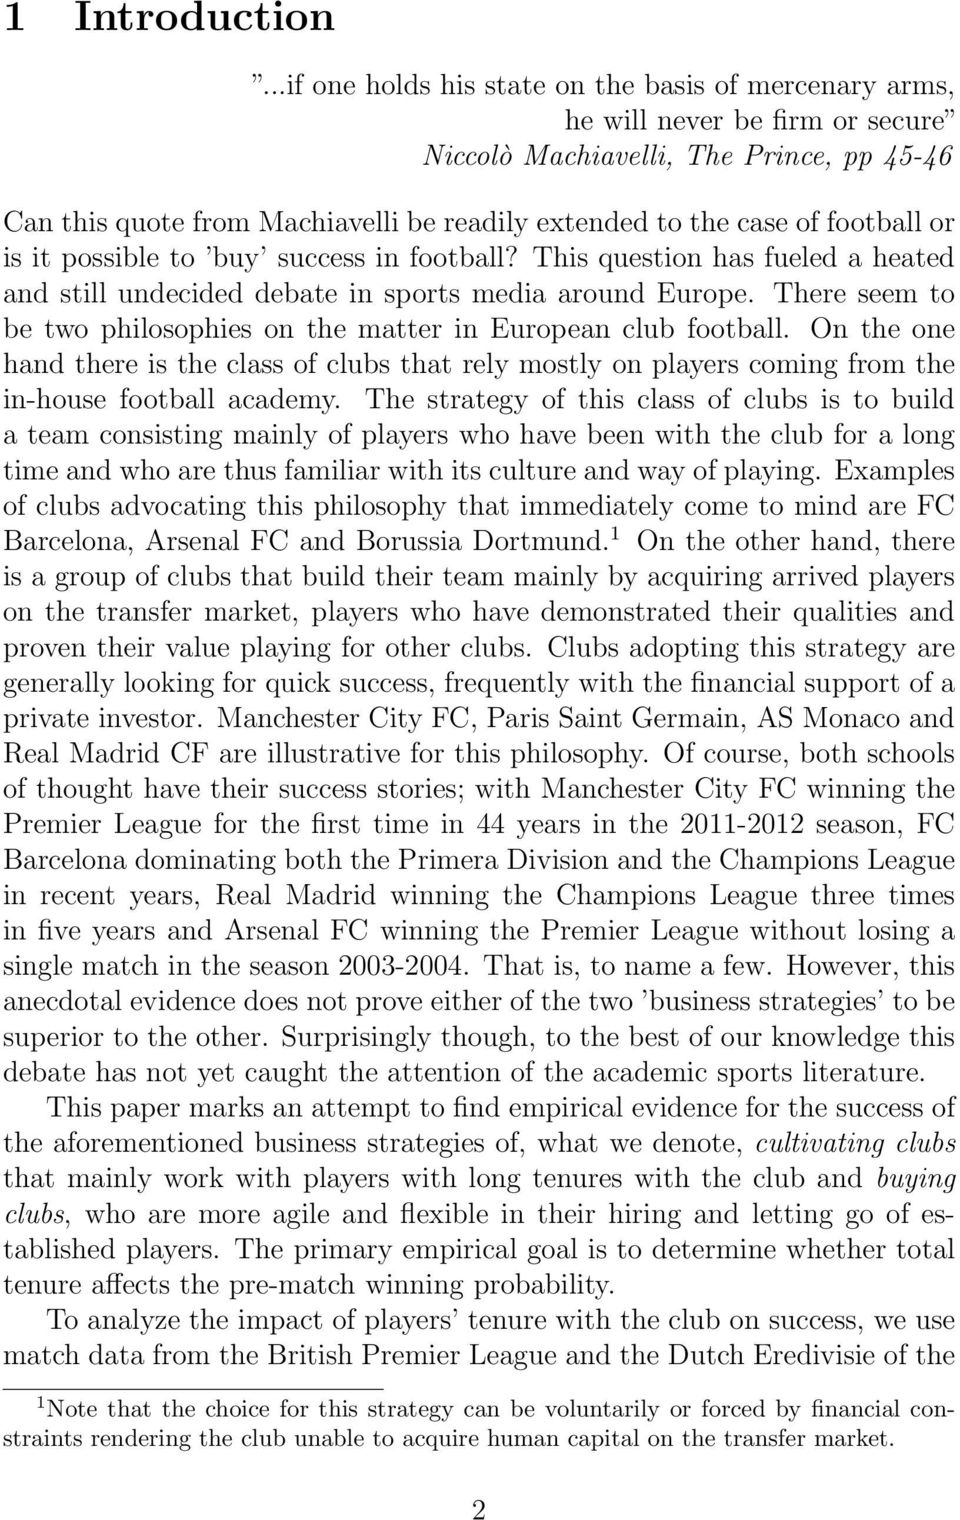 football or is it possible to buy success in football? This question has fueled a heated and still undecided debate in sports media around Europe.